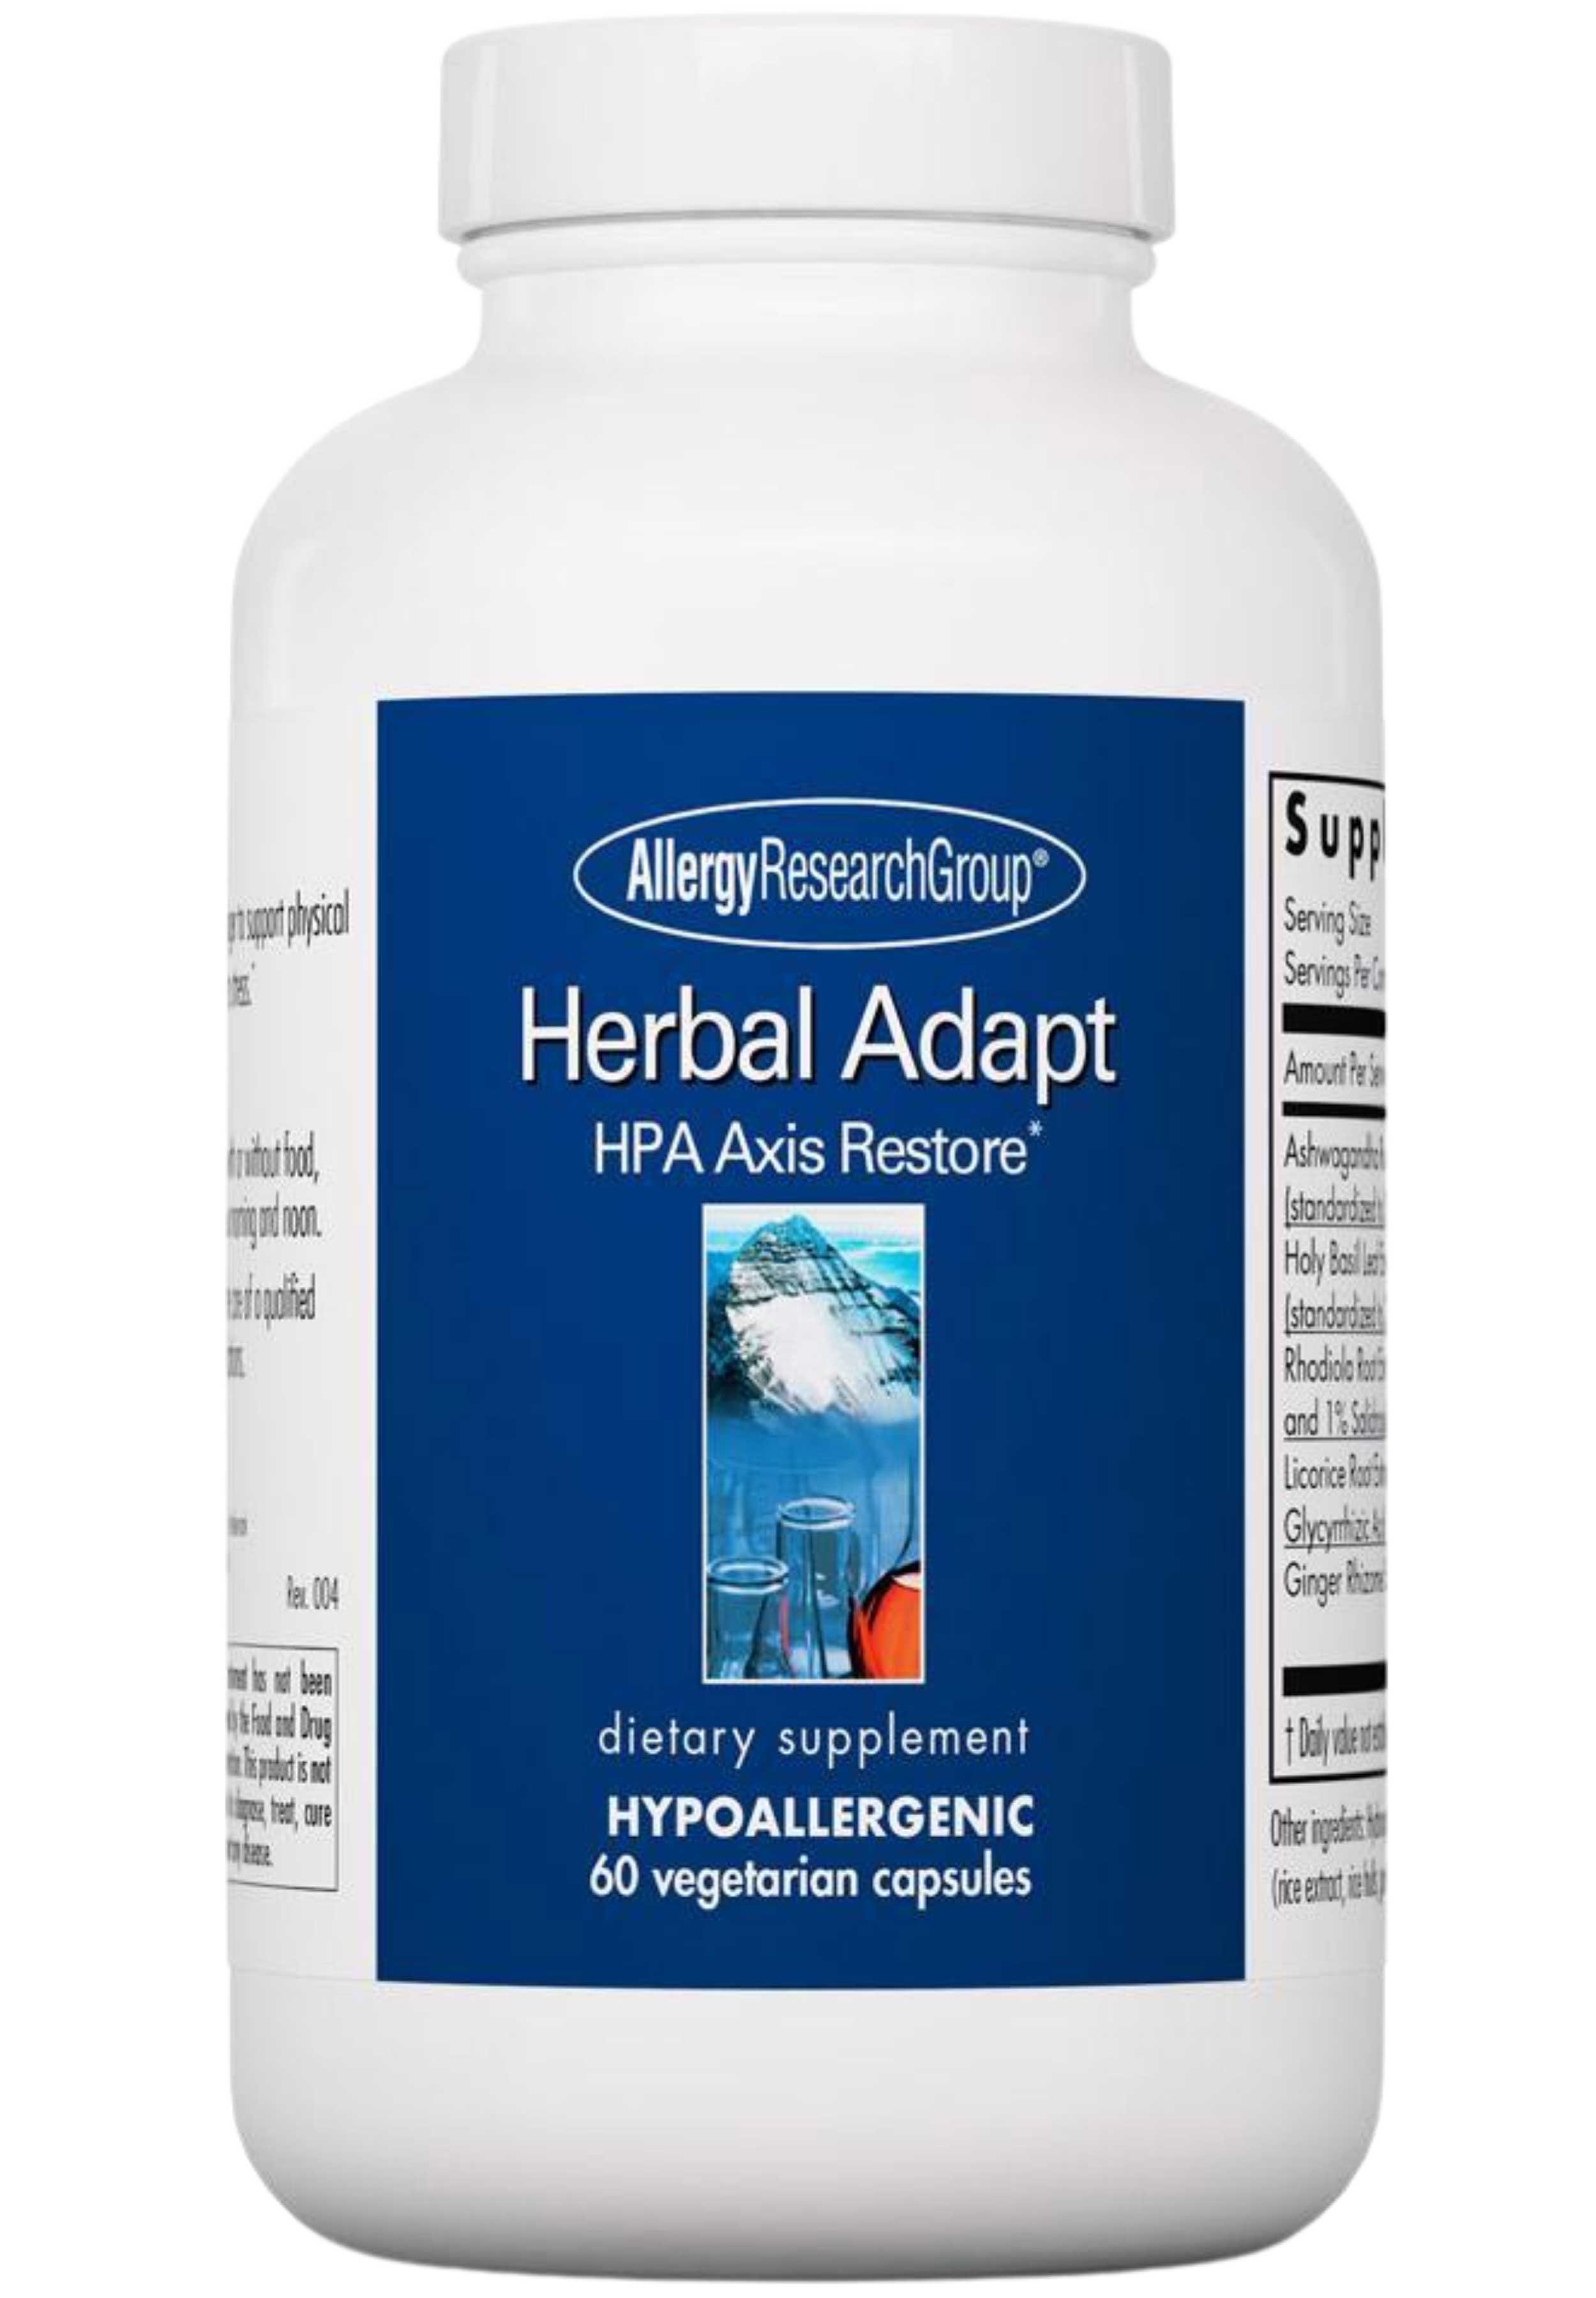 Allergy Research Group Herbal Adapt